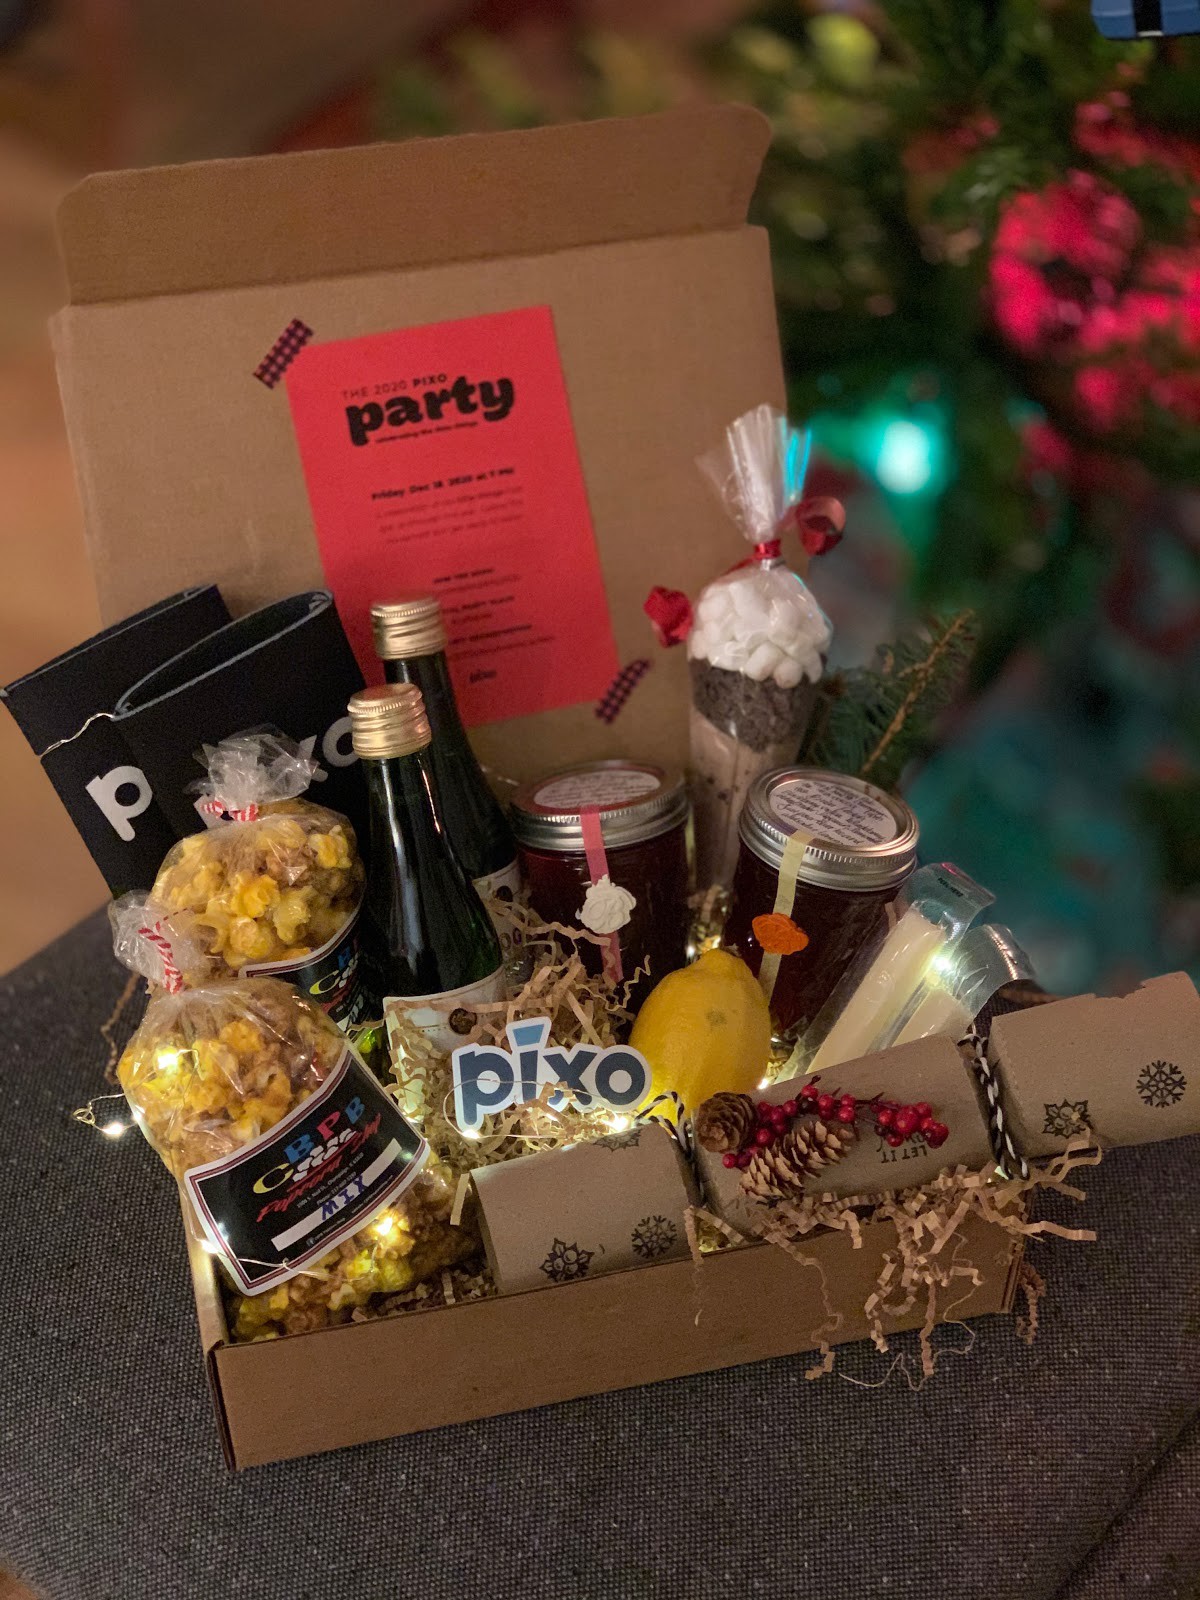 A box full of snacks, little champagne bottles, and a Pixo sticker.